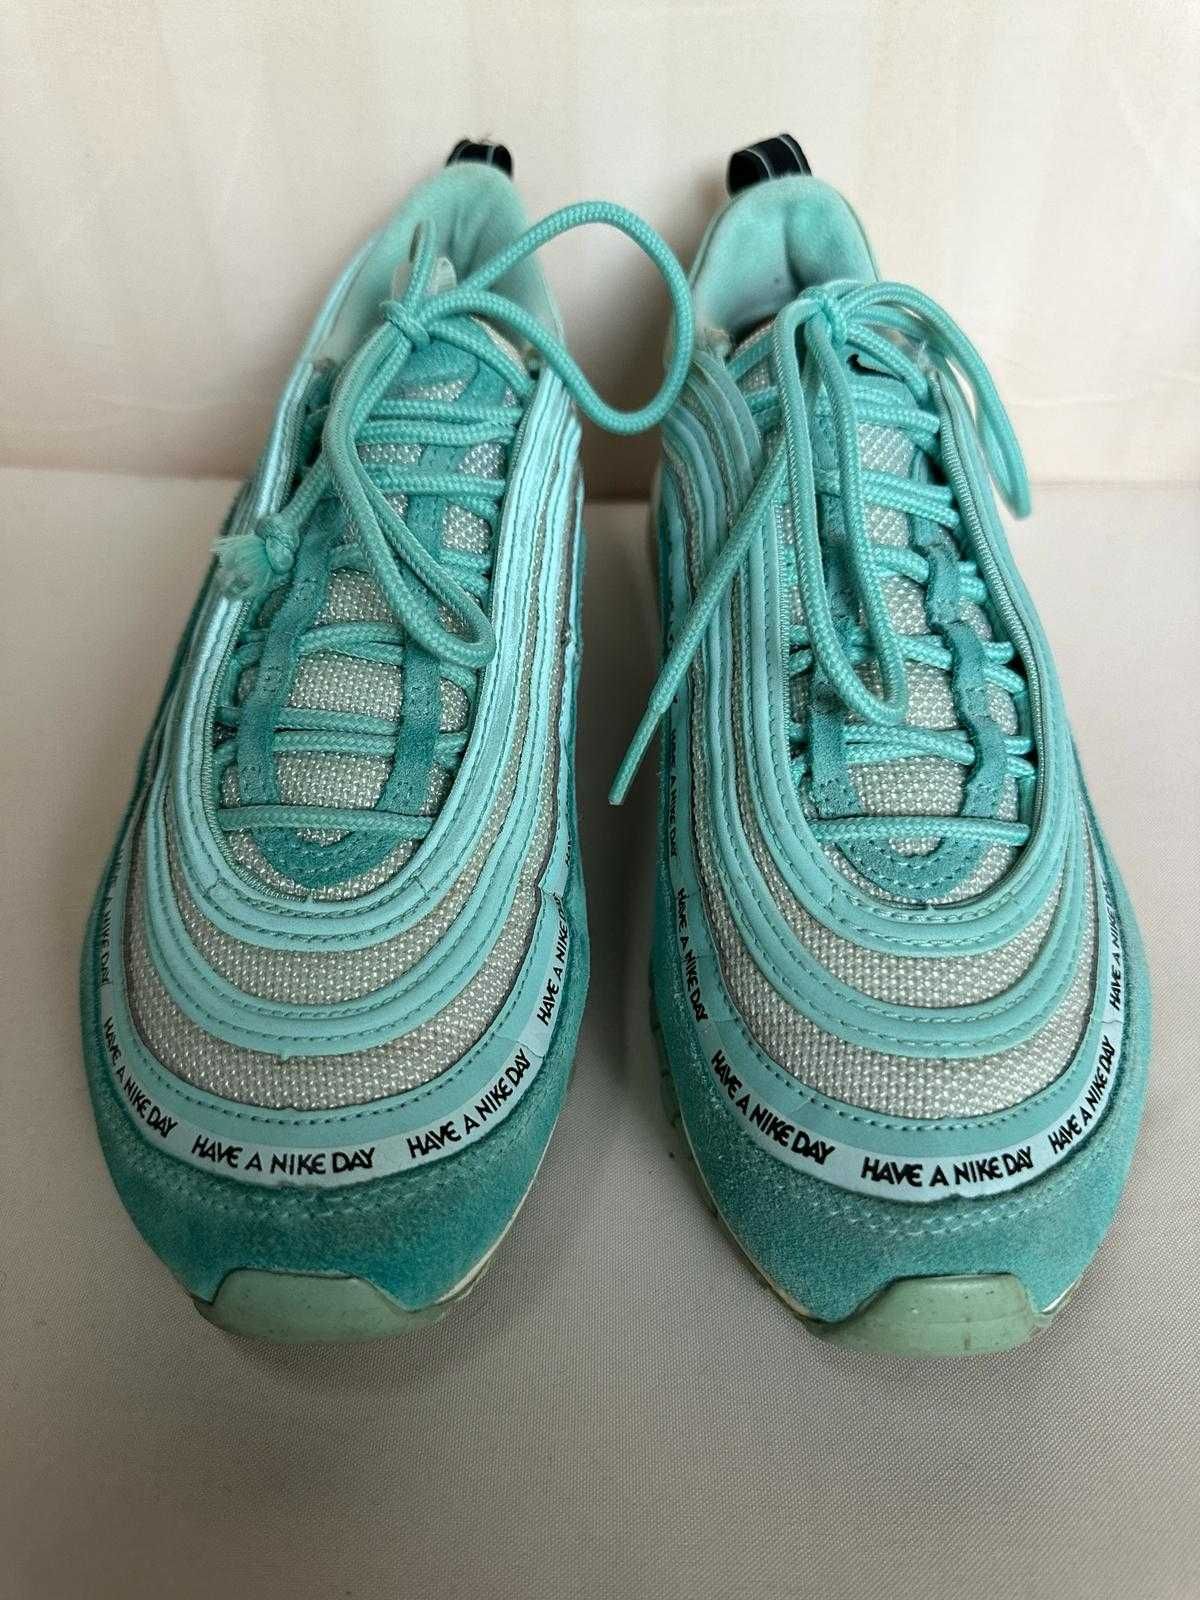 Nike Air Max 97 - "Have a Nike day" GS Teal